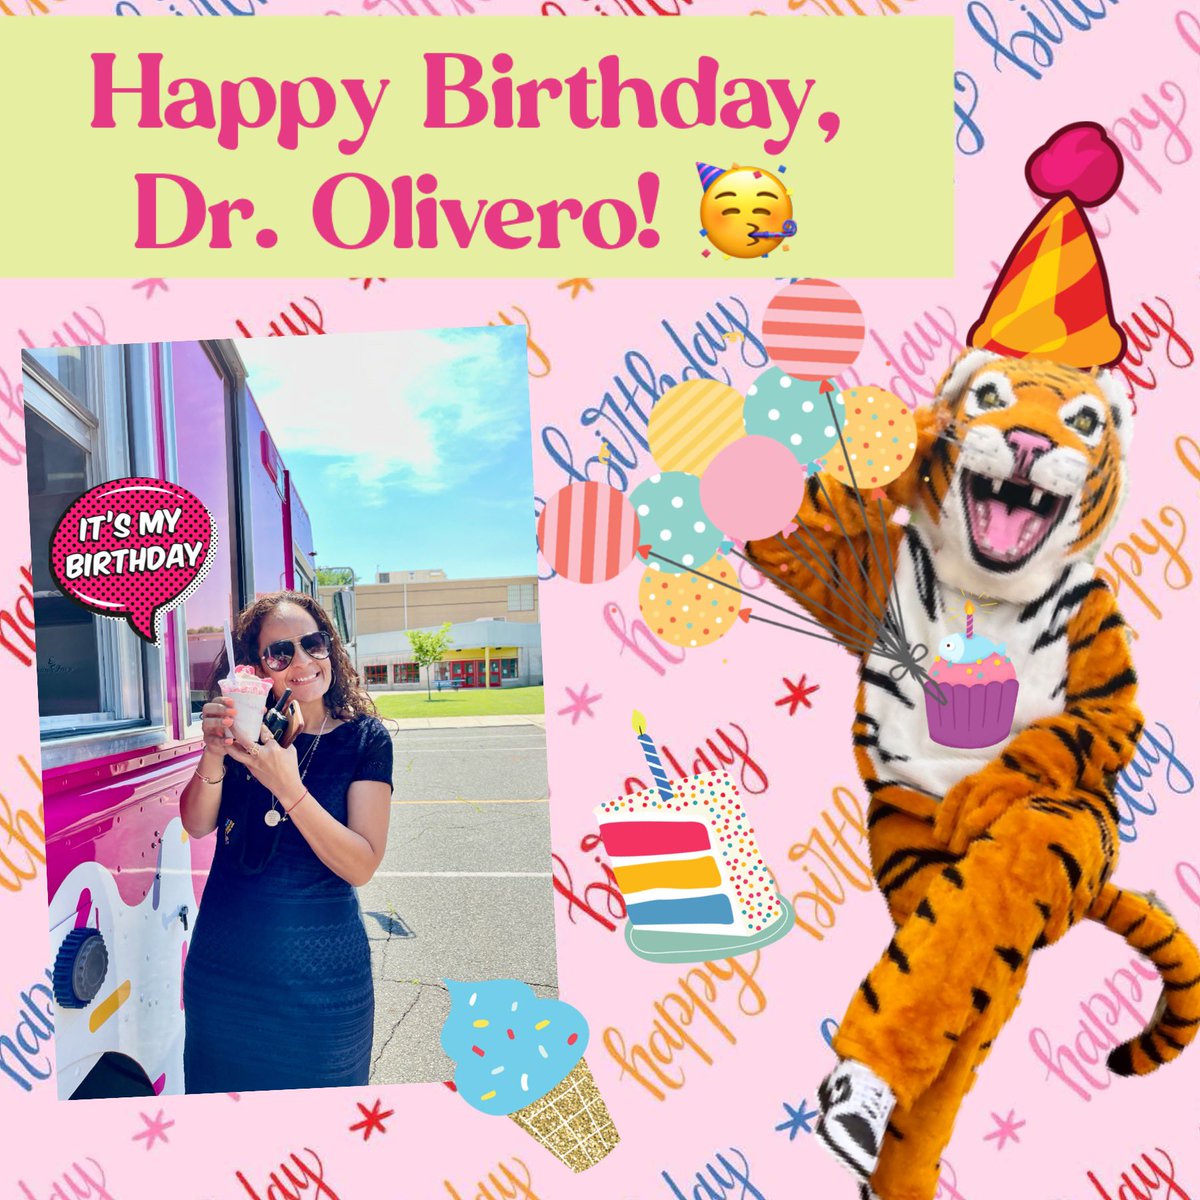 Wishing the best principal the best birthday! Your School #4 family loves you! We hope your day is as sweet and special as you are! Happy birthday, Dr. @suzanne_olivero ! 🎈🍦🎈#WeRoarAtSchool4 @LindenPS @AtiyaYPerkins